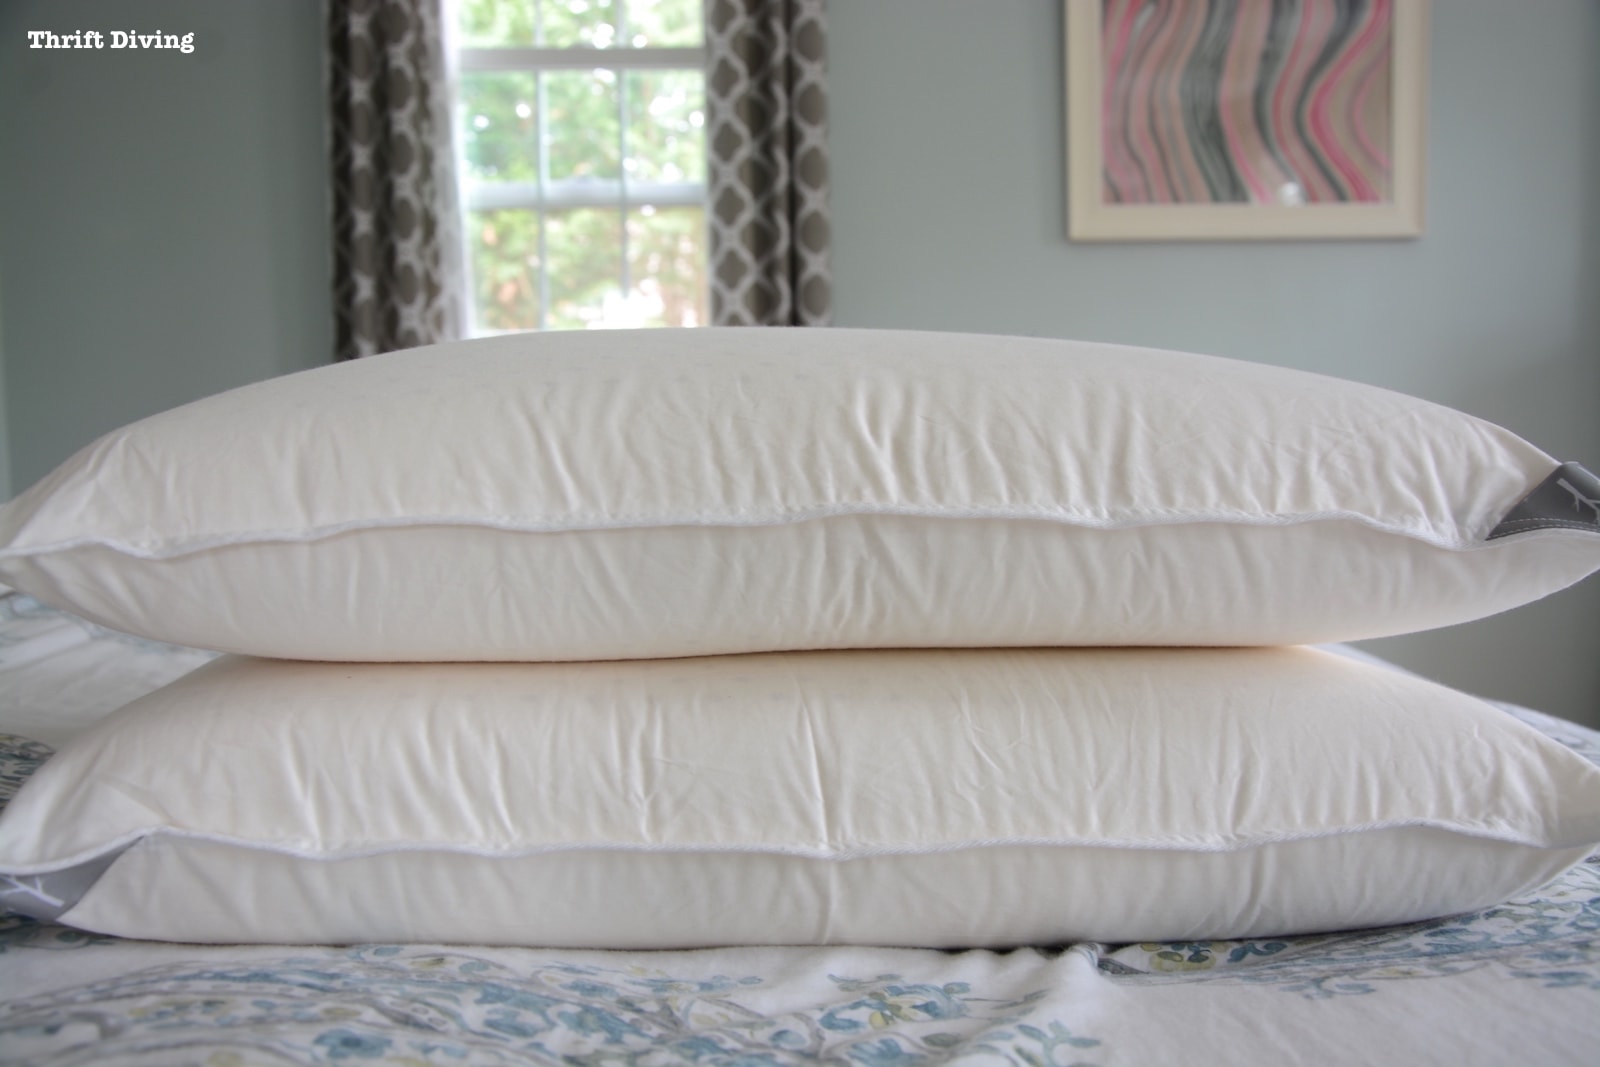 Are Brentwood pillows worth it? A Brentwood Home pillows review -Carmel pillows won't lose their shape. - Thrift Diving